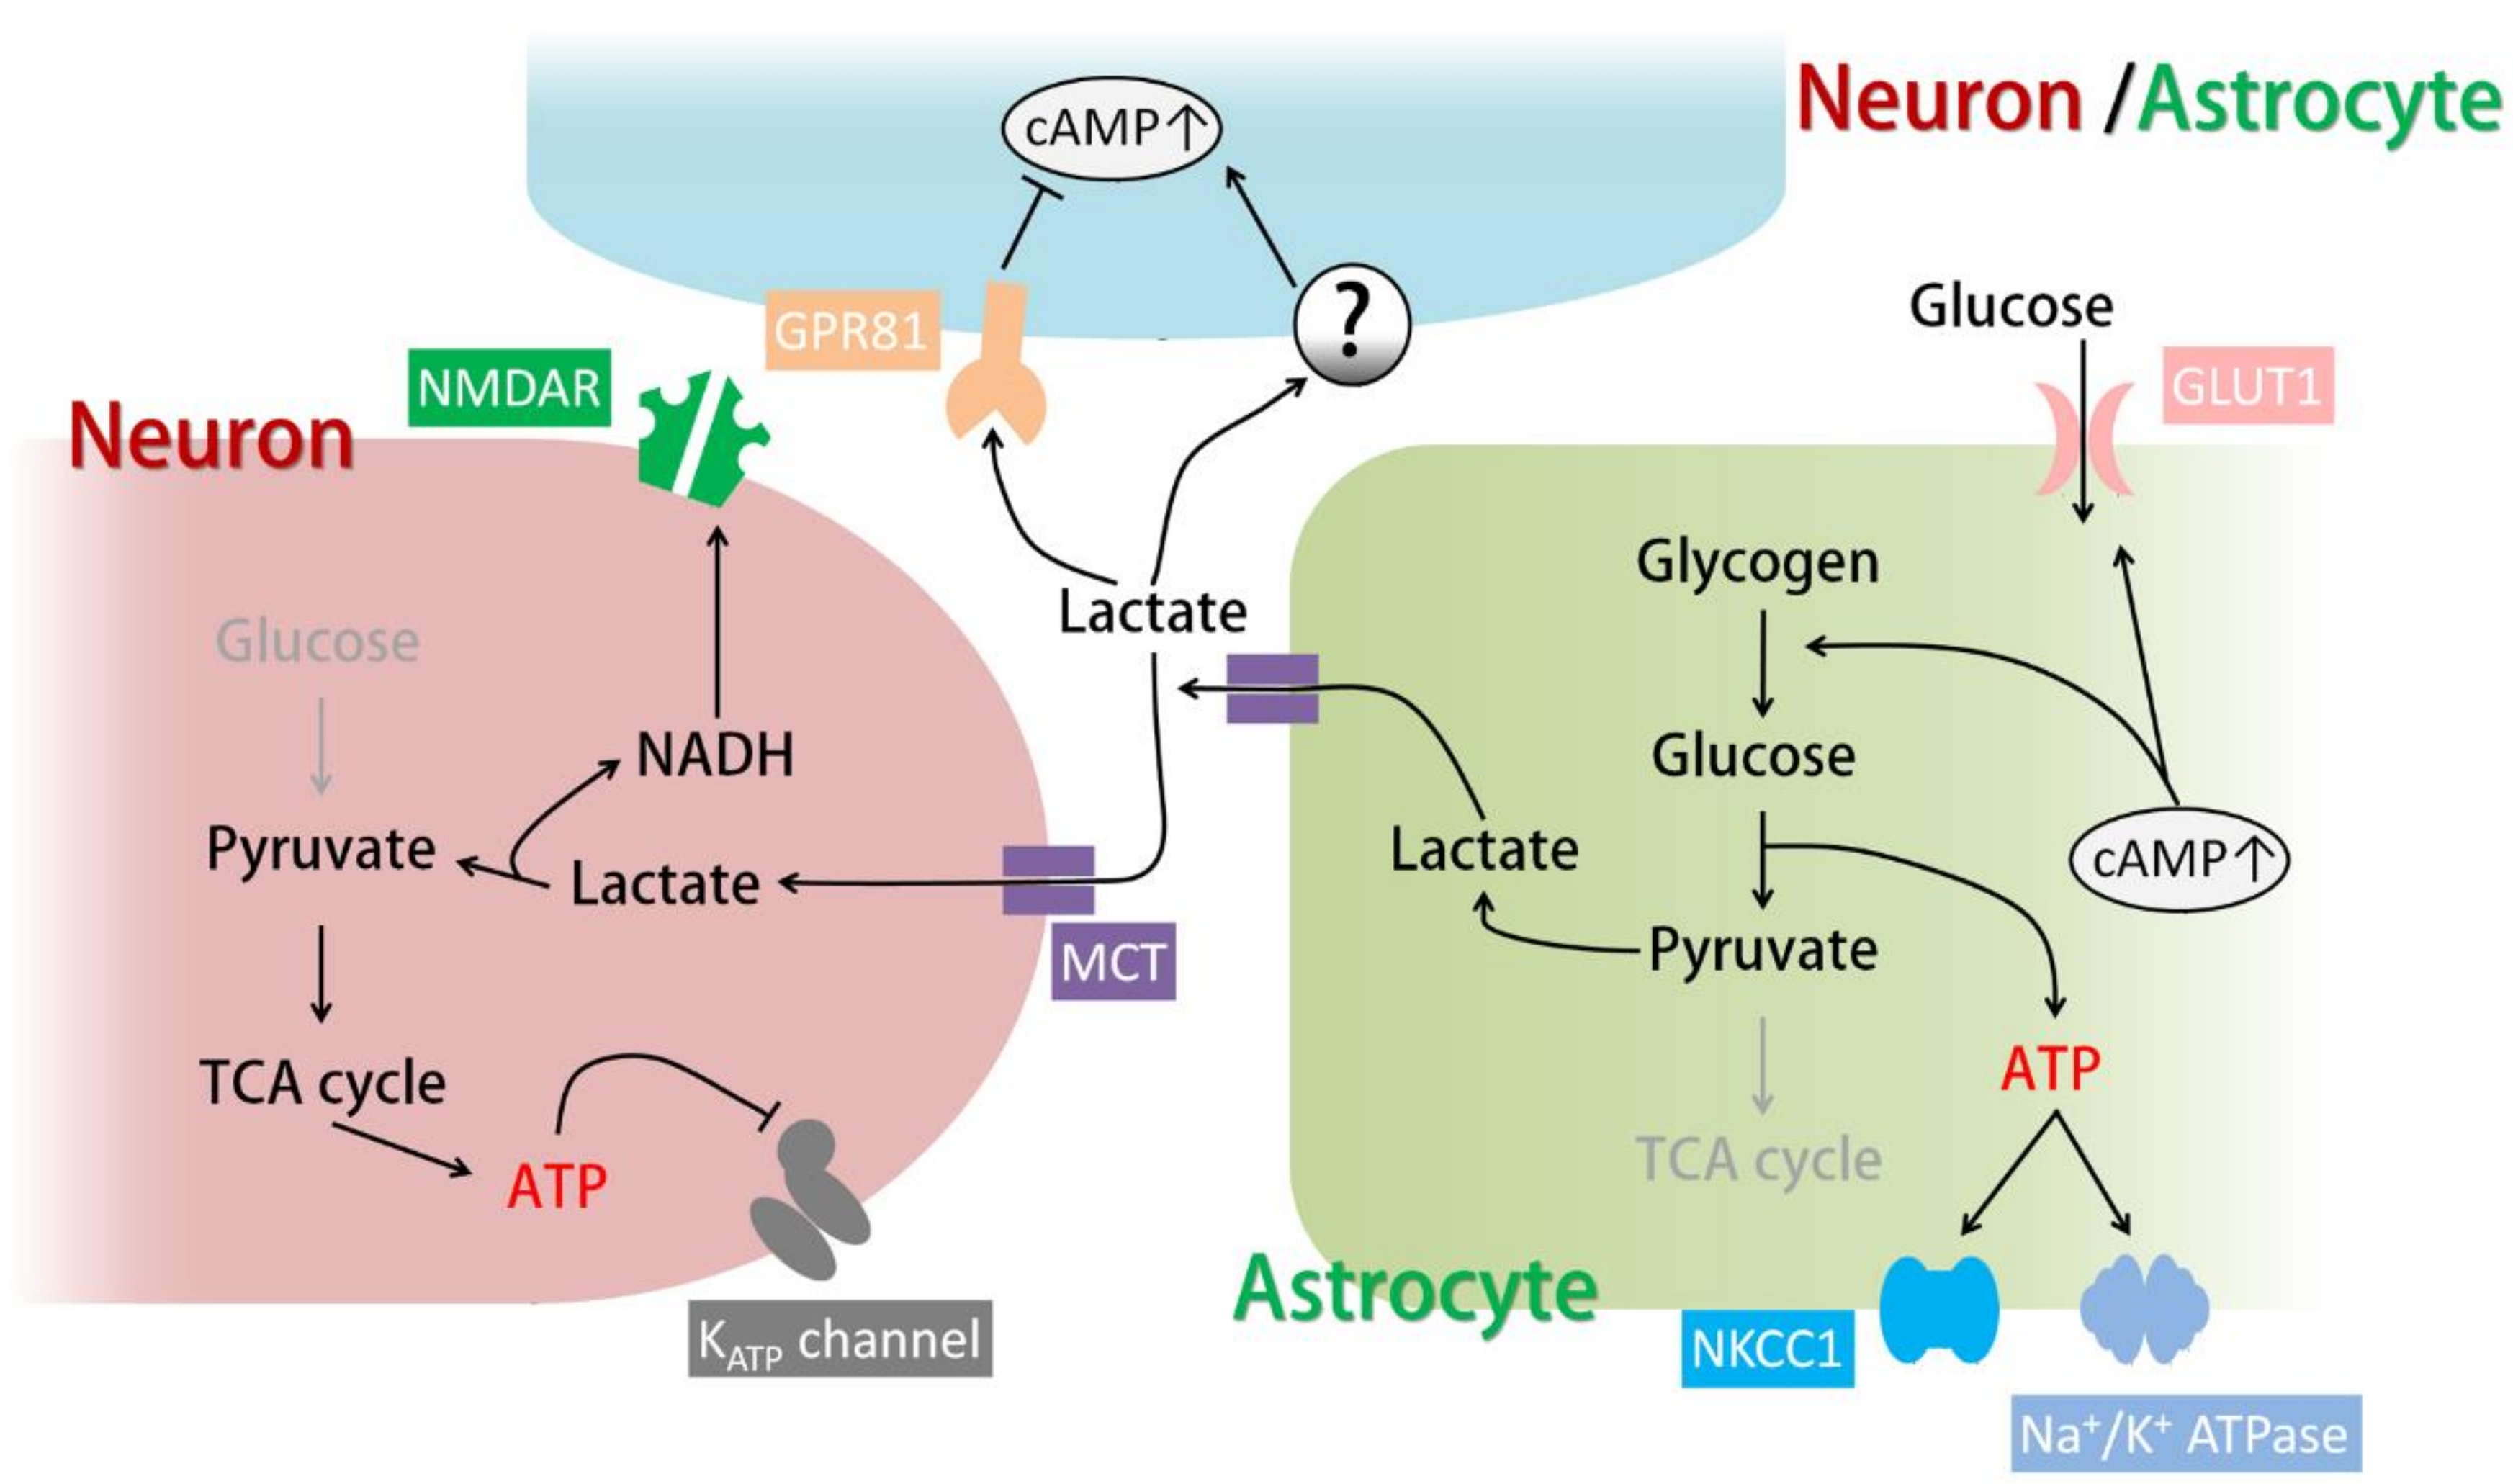 cyclic amp activates cellular enzymes known as